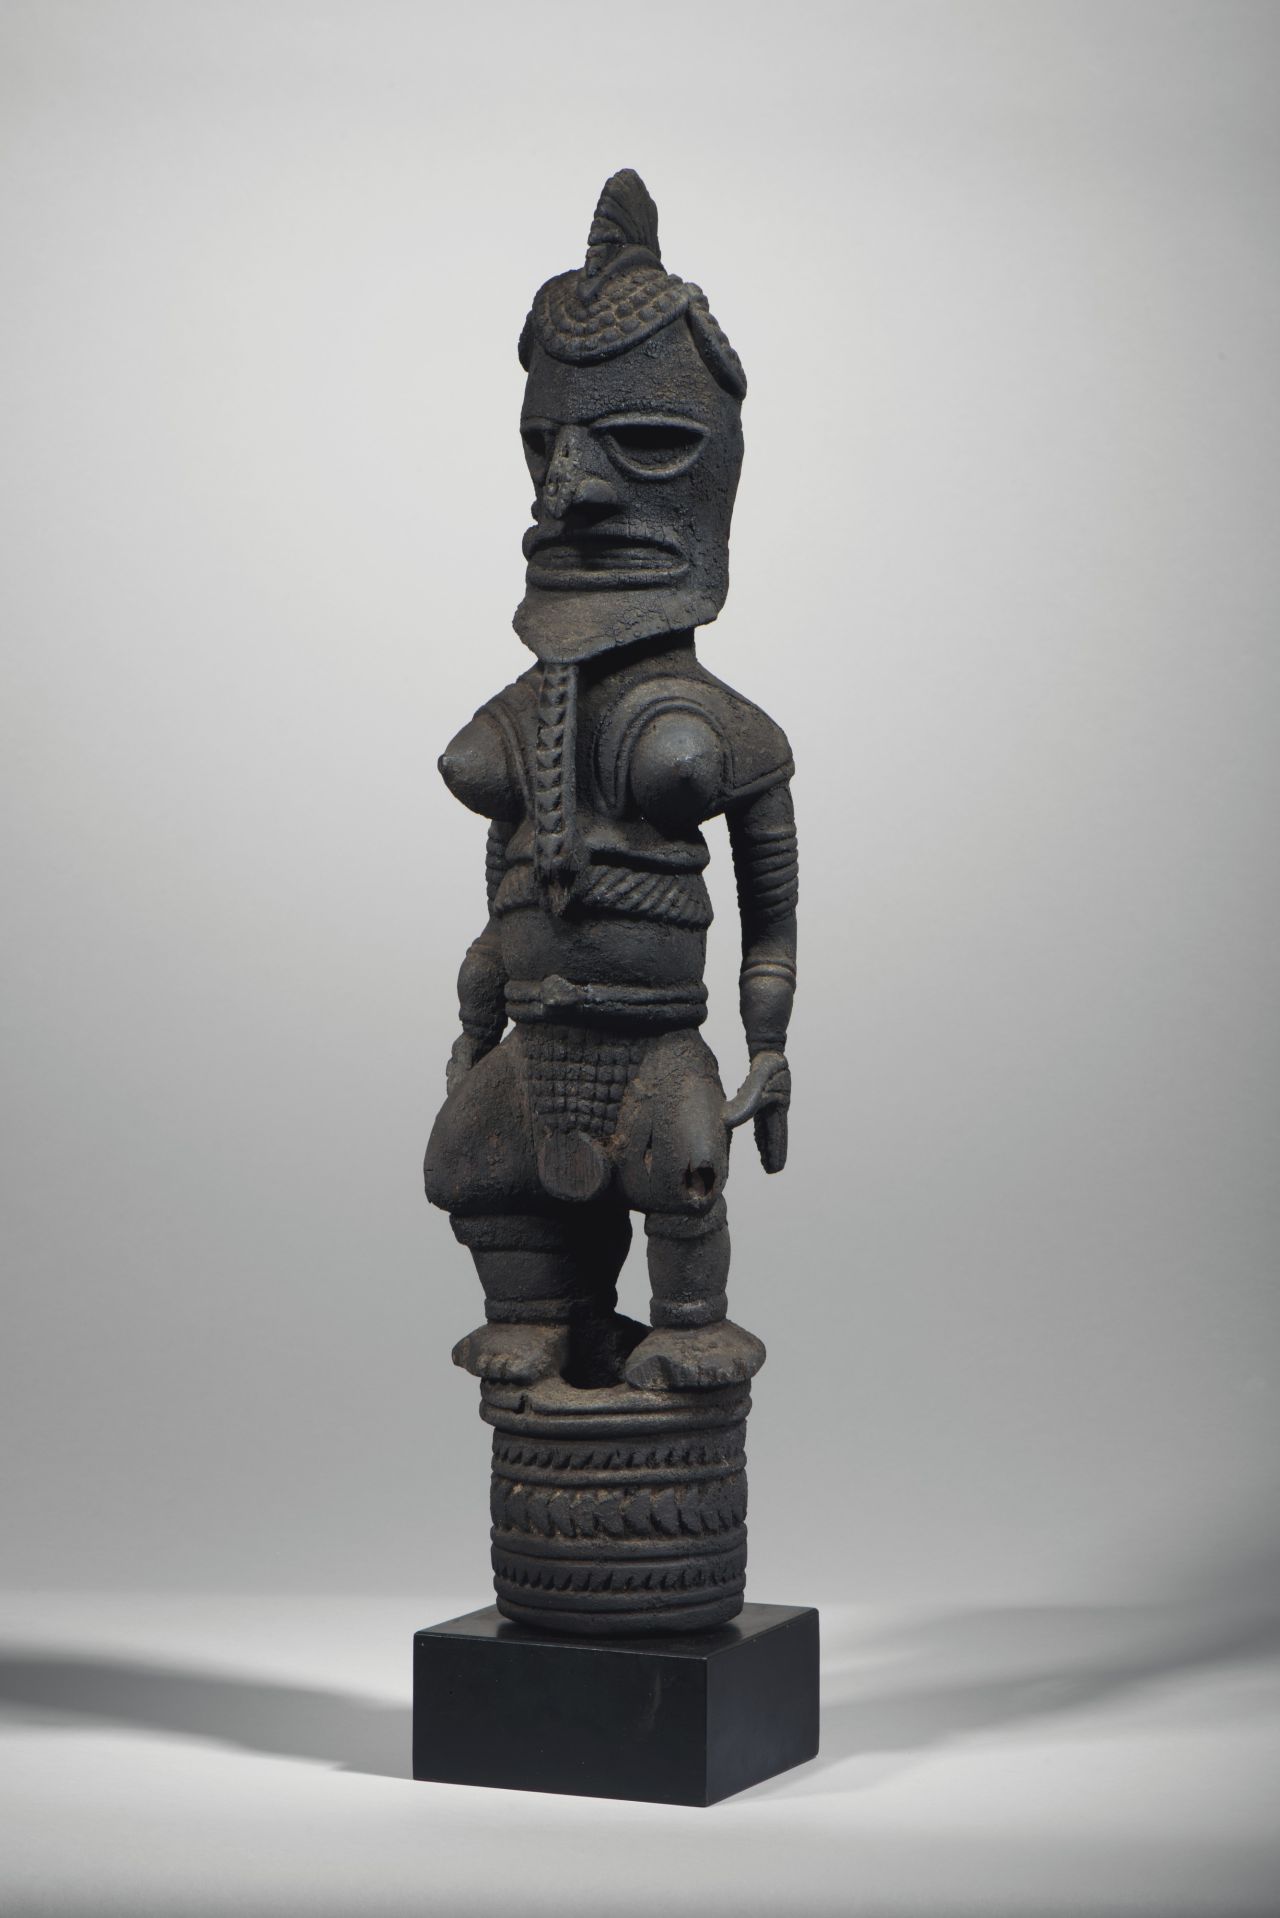 This Uli figure will shown at an upcoming Christie's auction in Paris.